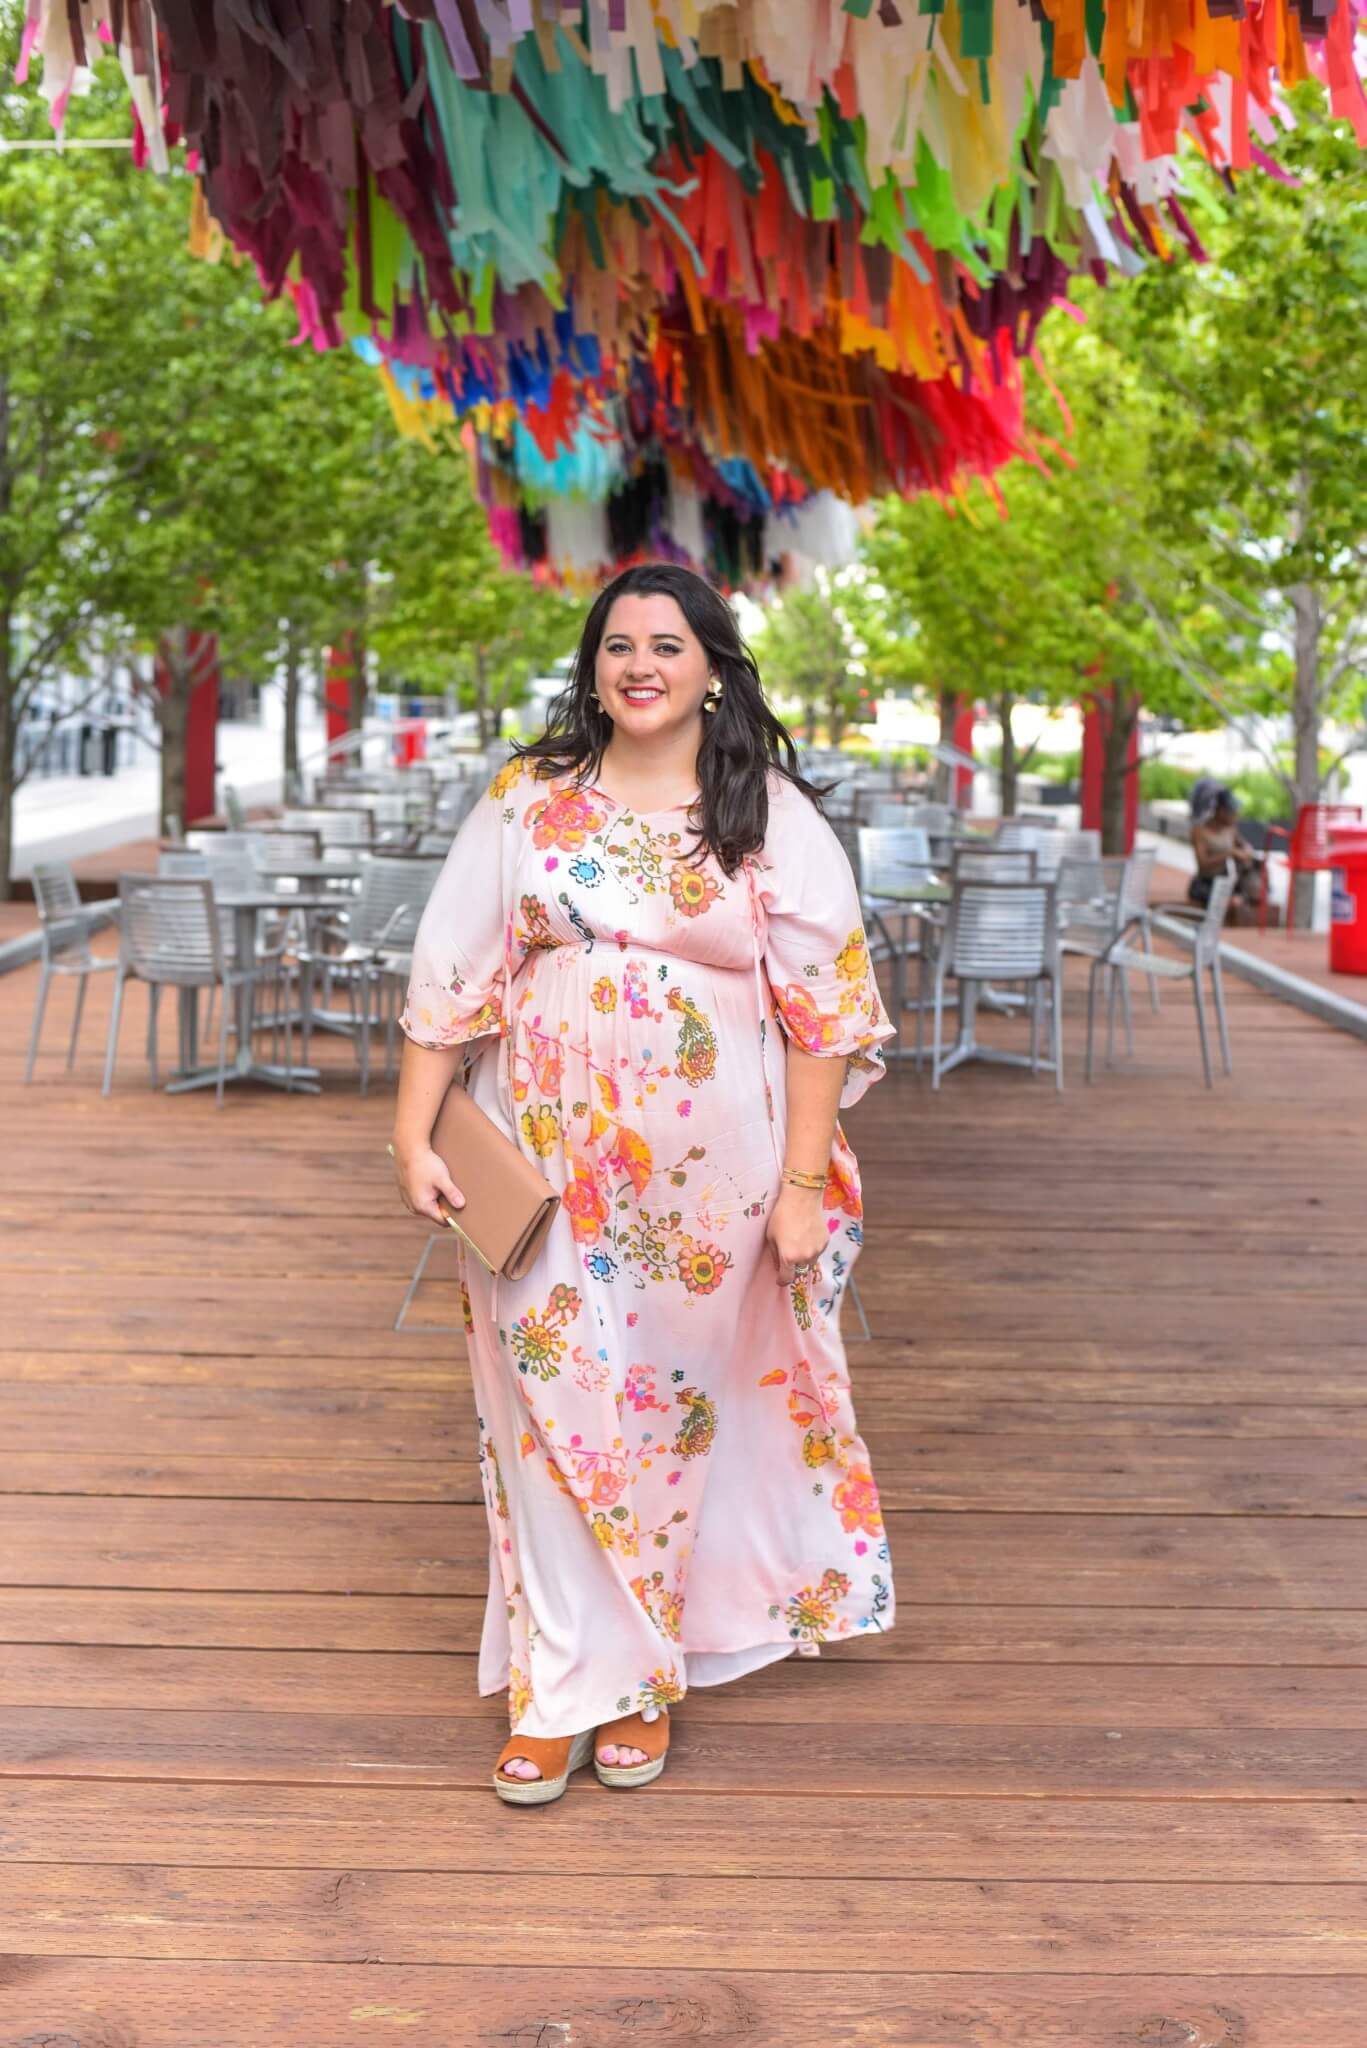 Looking to have a closet with endless possibilities? Check out Gwynnie Bee, a plus size clothing subscription service, which has this dress and so many other items that will fit perfectly into your everyday life. #maxidress #weekendwear #plussize  - Gwynnie Bee outfit by popular Houston fashion blogger Something Gold, Something Blue